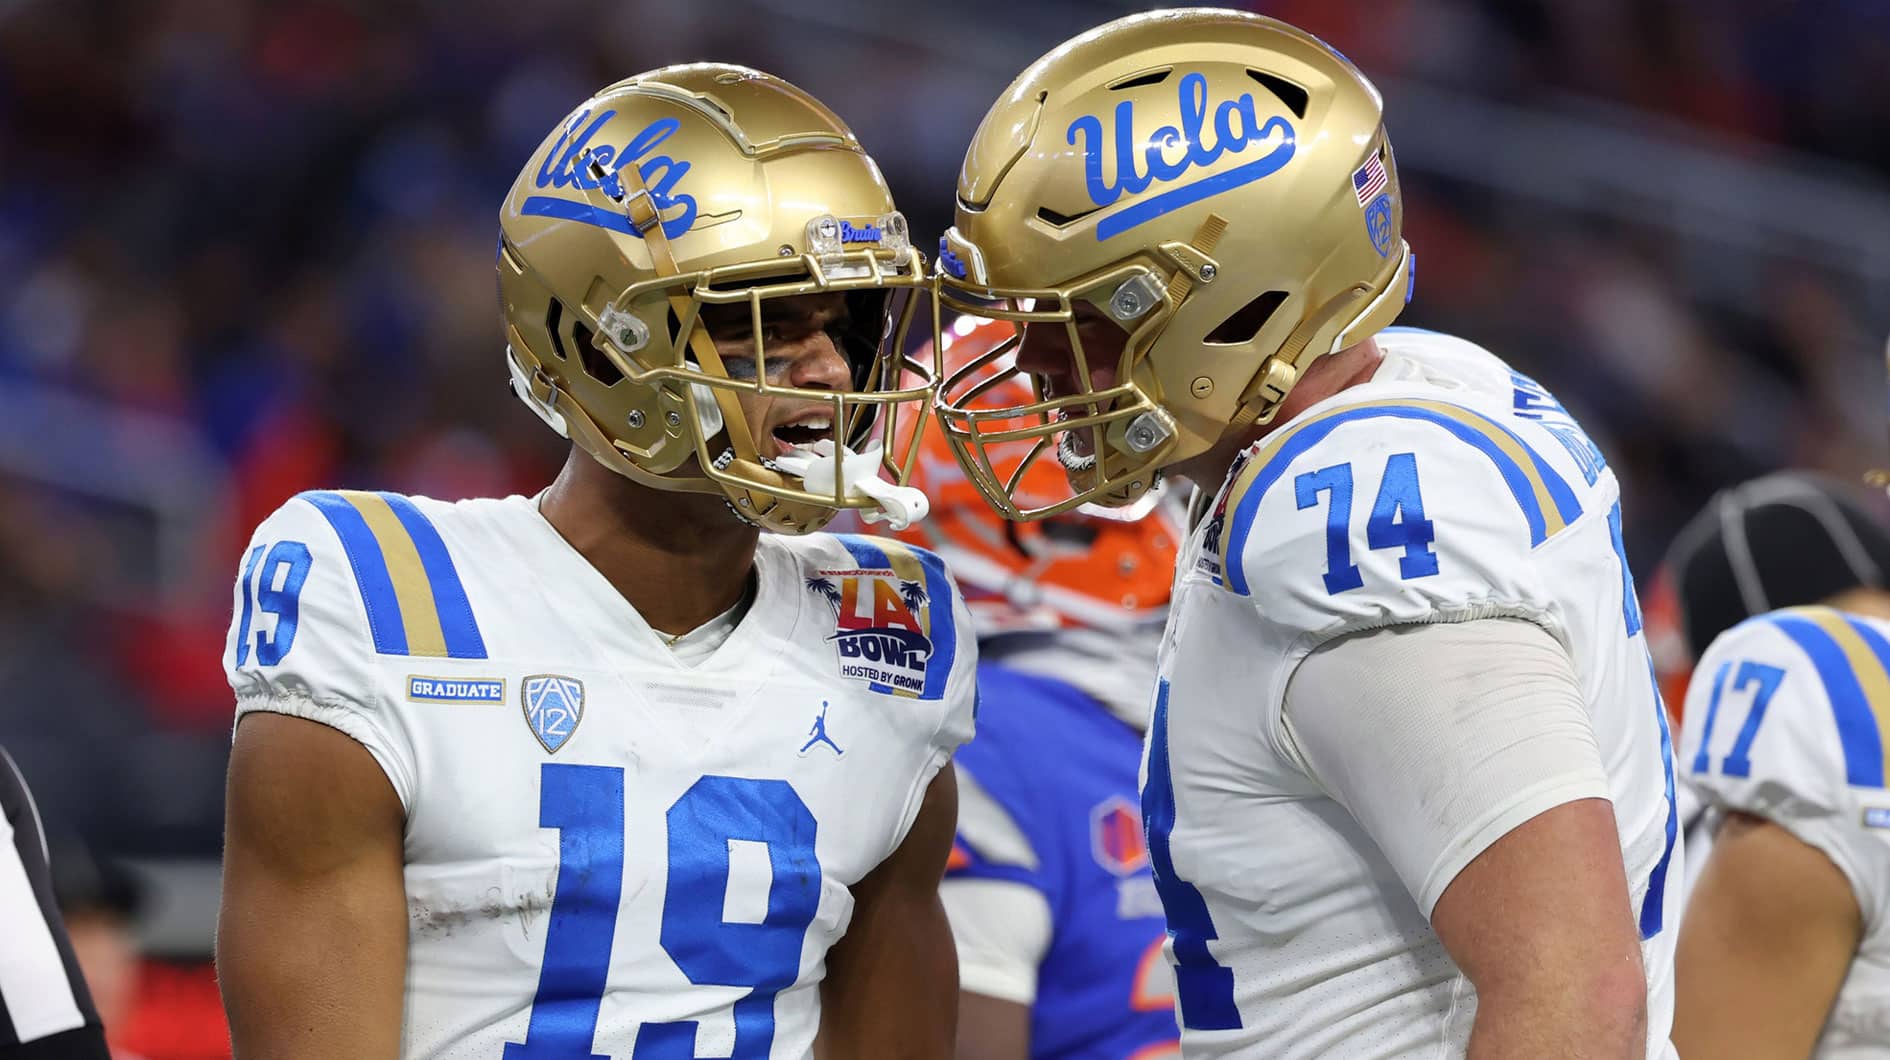 UCLA Bruins wide receiver Kyle Ford (19) celebrates with offensive lineman Spencer Holstege (74) after catching a touchdown pass during the third quarter of the LA Bowl at SoFi Stadium. 